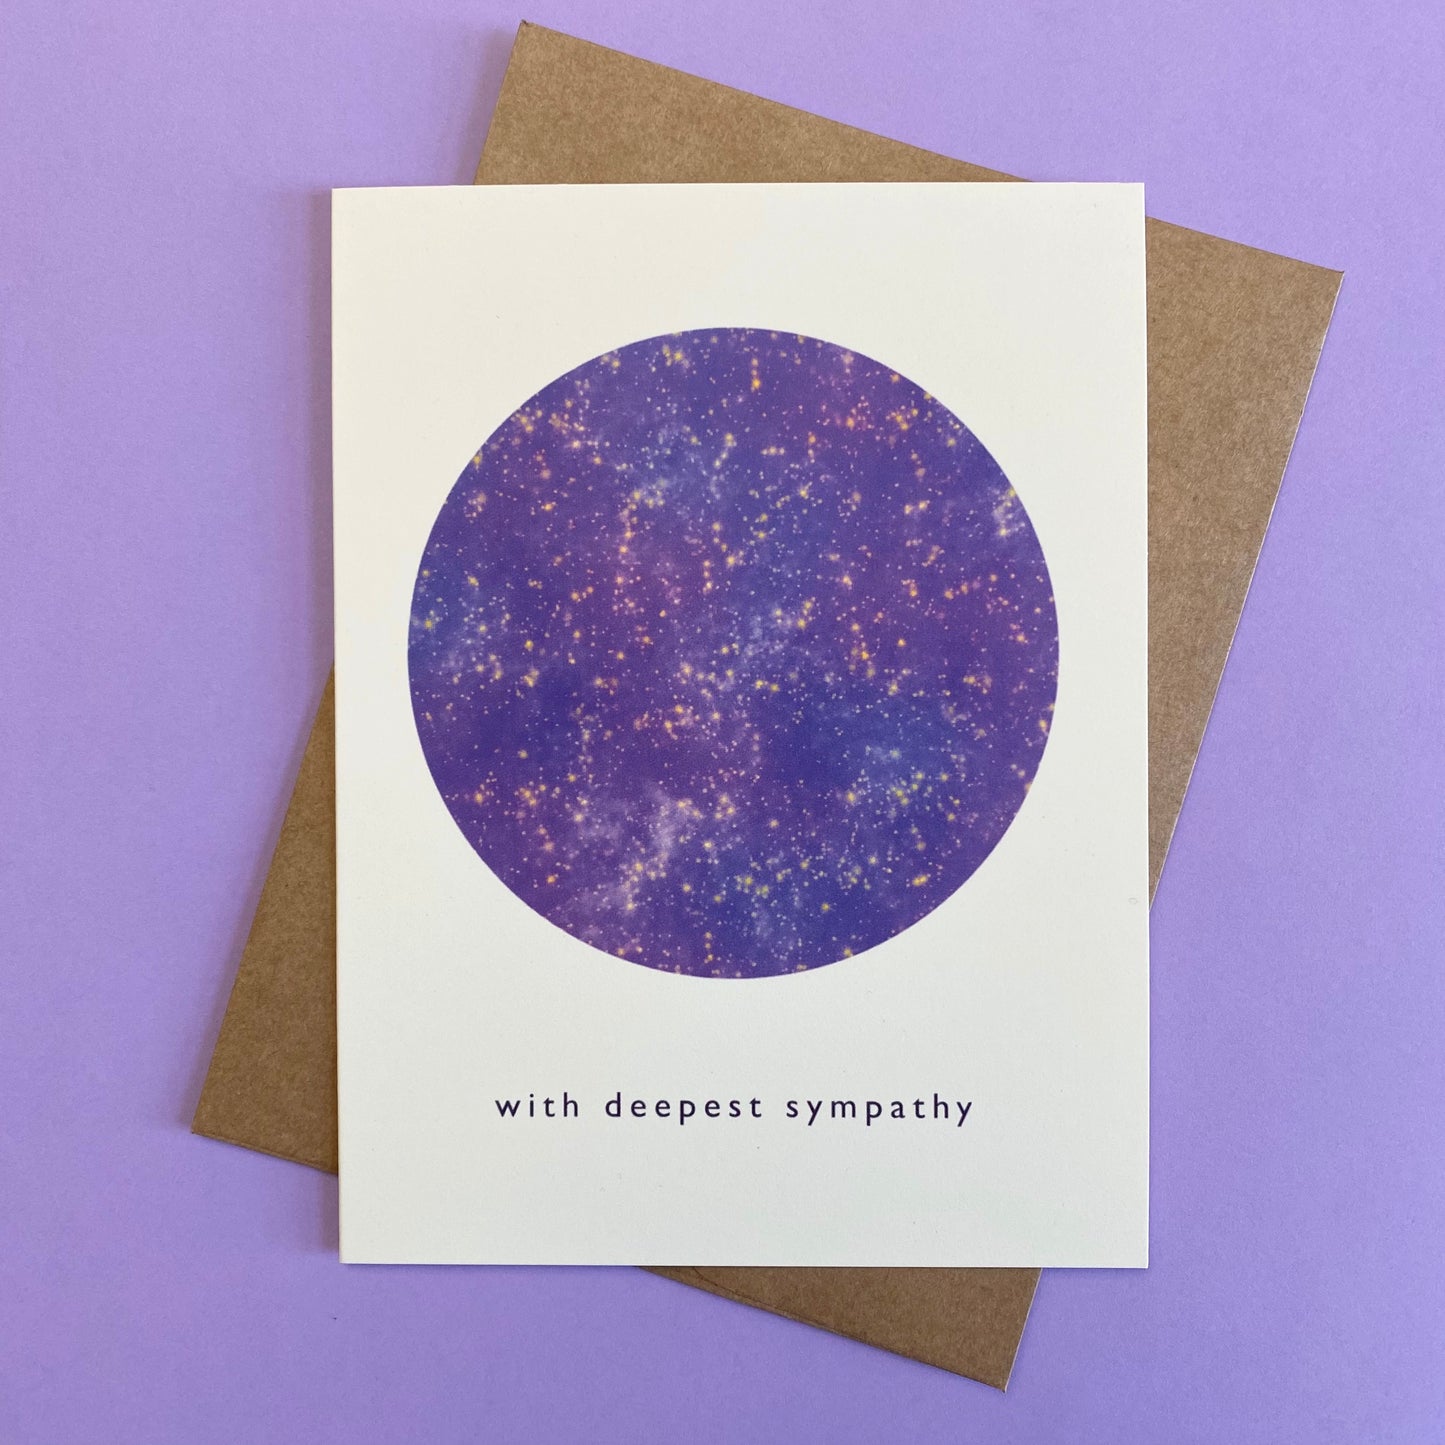 Sympathy card set with starry sky and the text “with deepest sympathy”